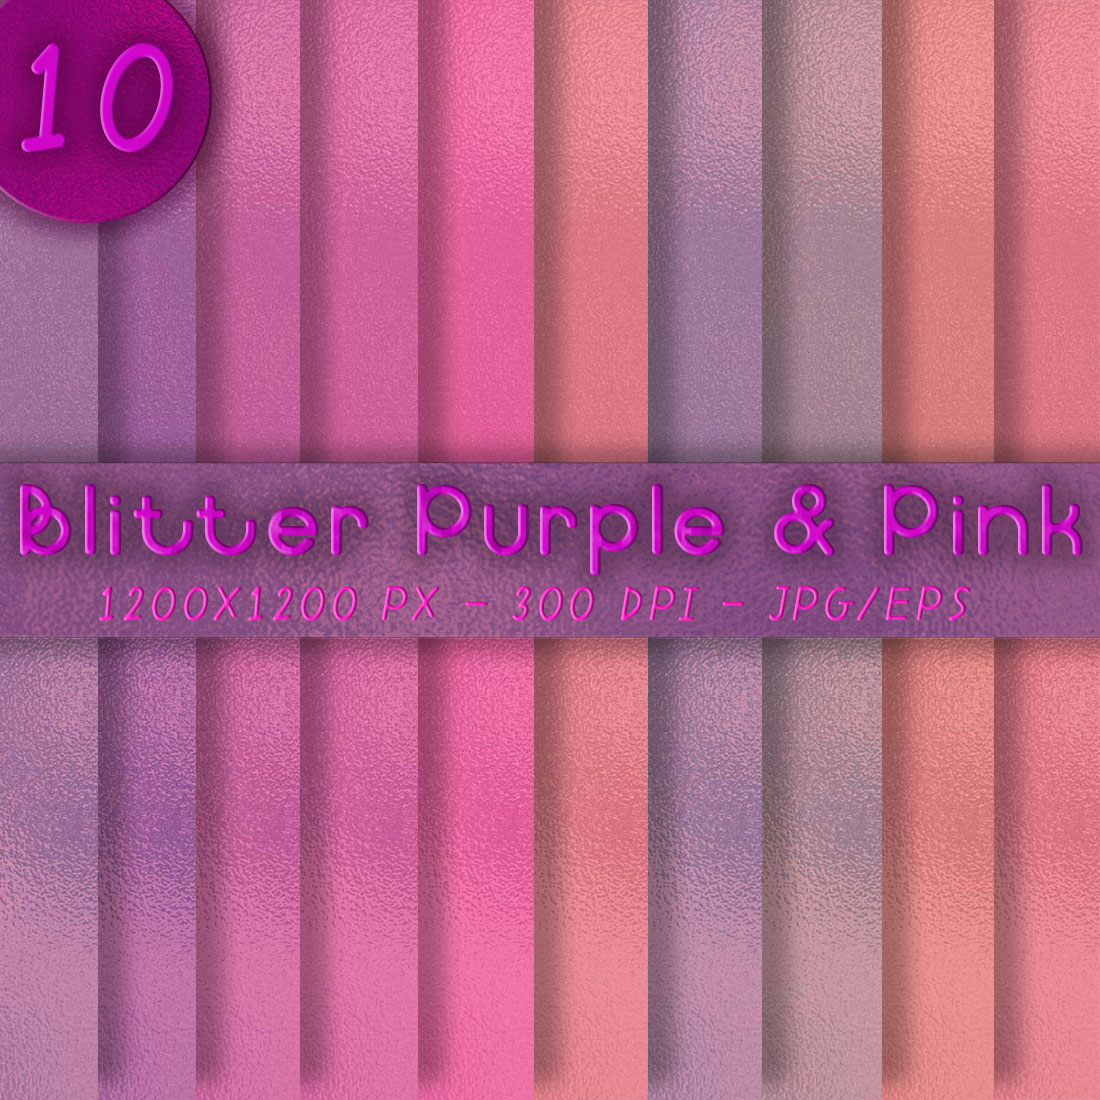 Glitter Purple and Pink Textures facebook image.